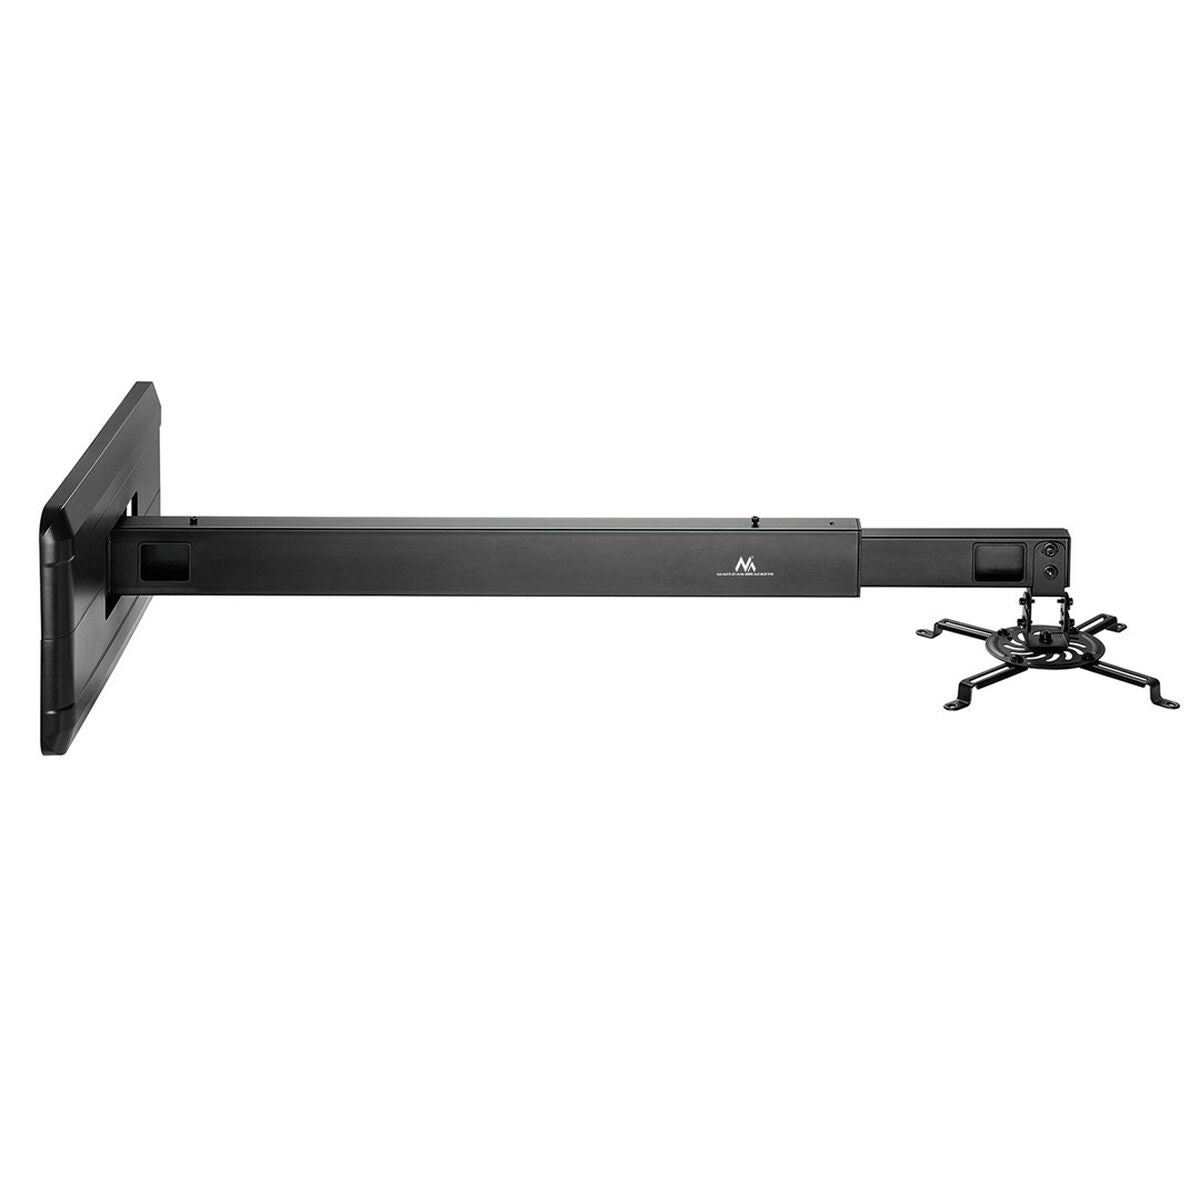 Expandable Wall Support for a Projector MacLean MC-945 Black